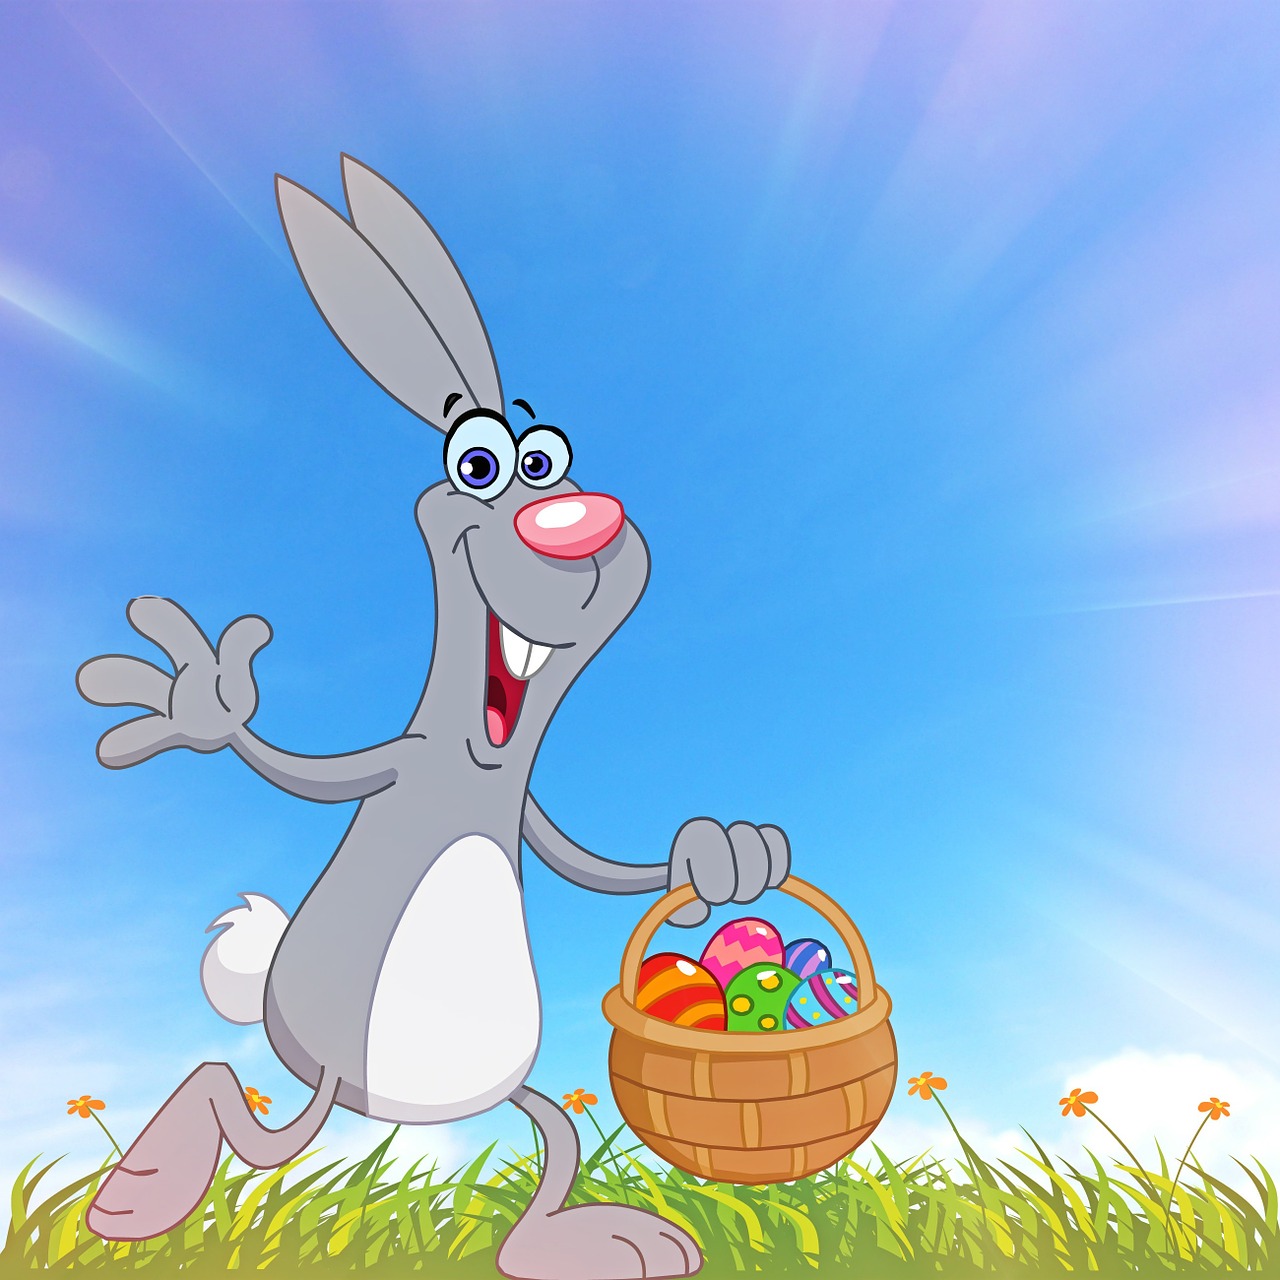 easter easter greeting happy easter free photo